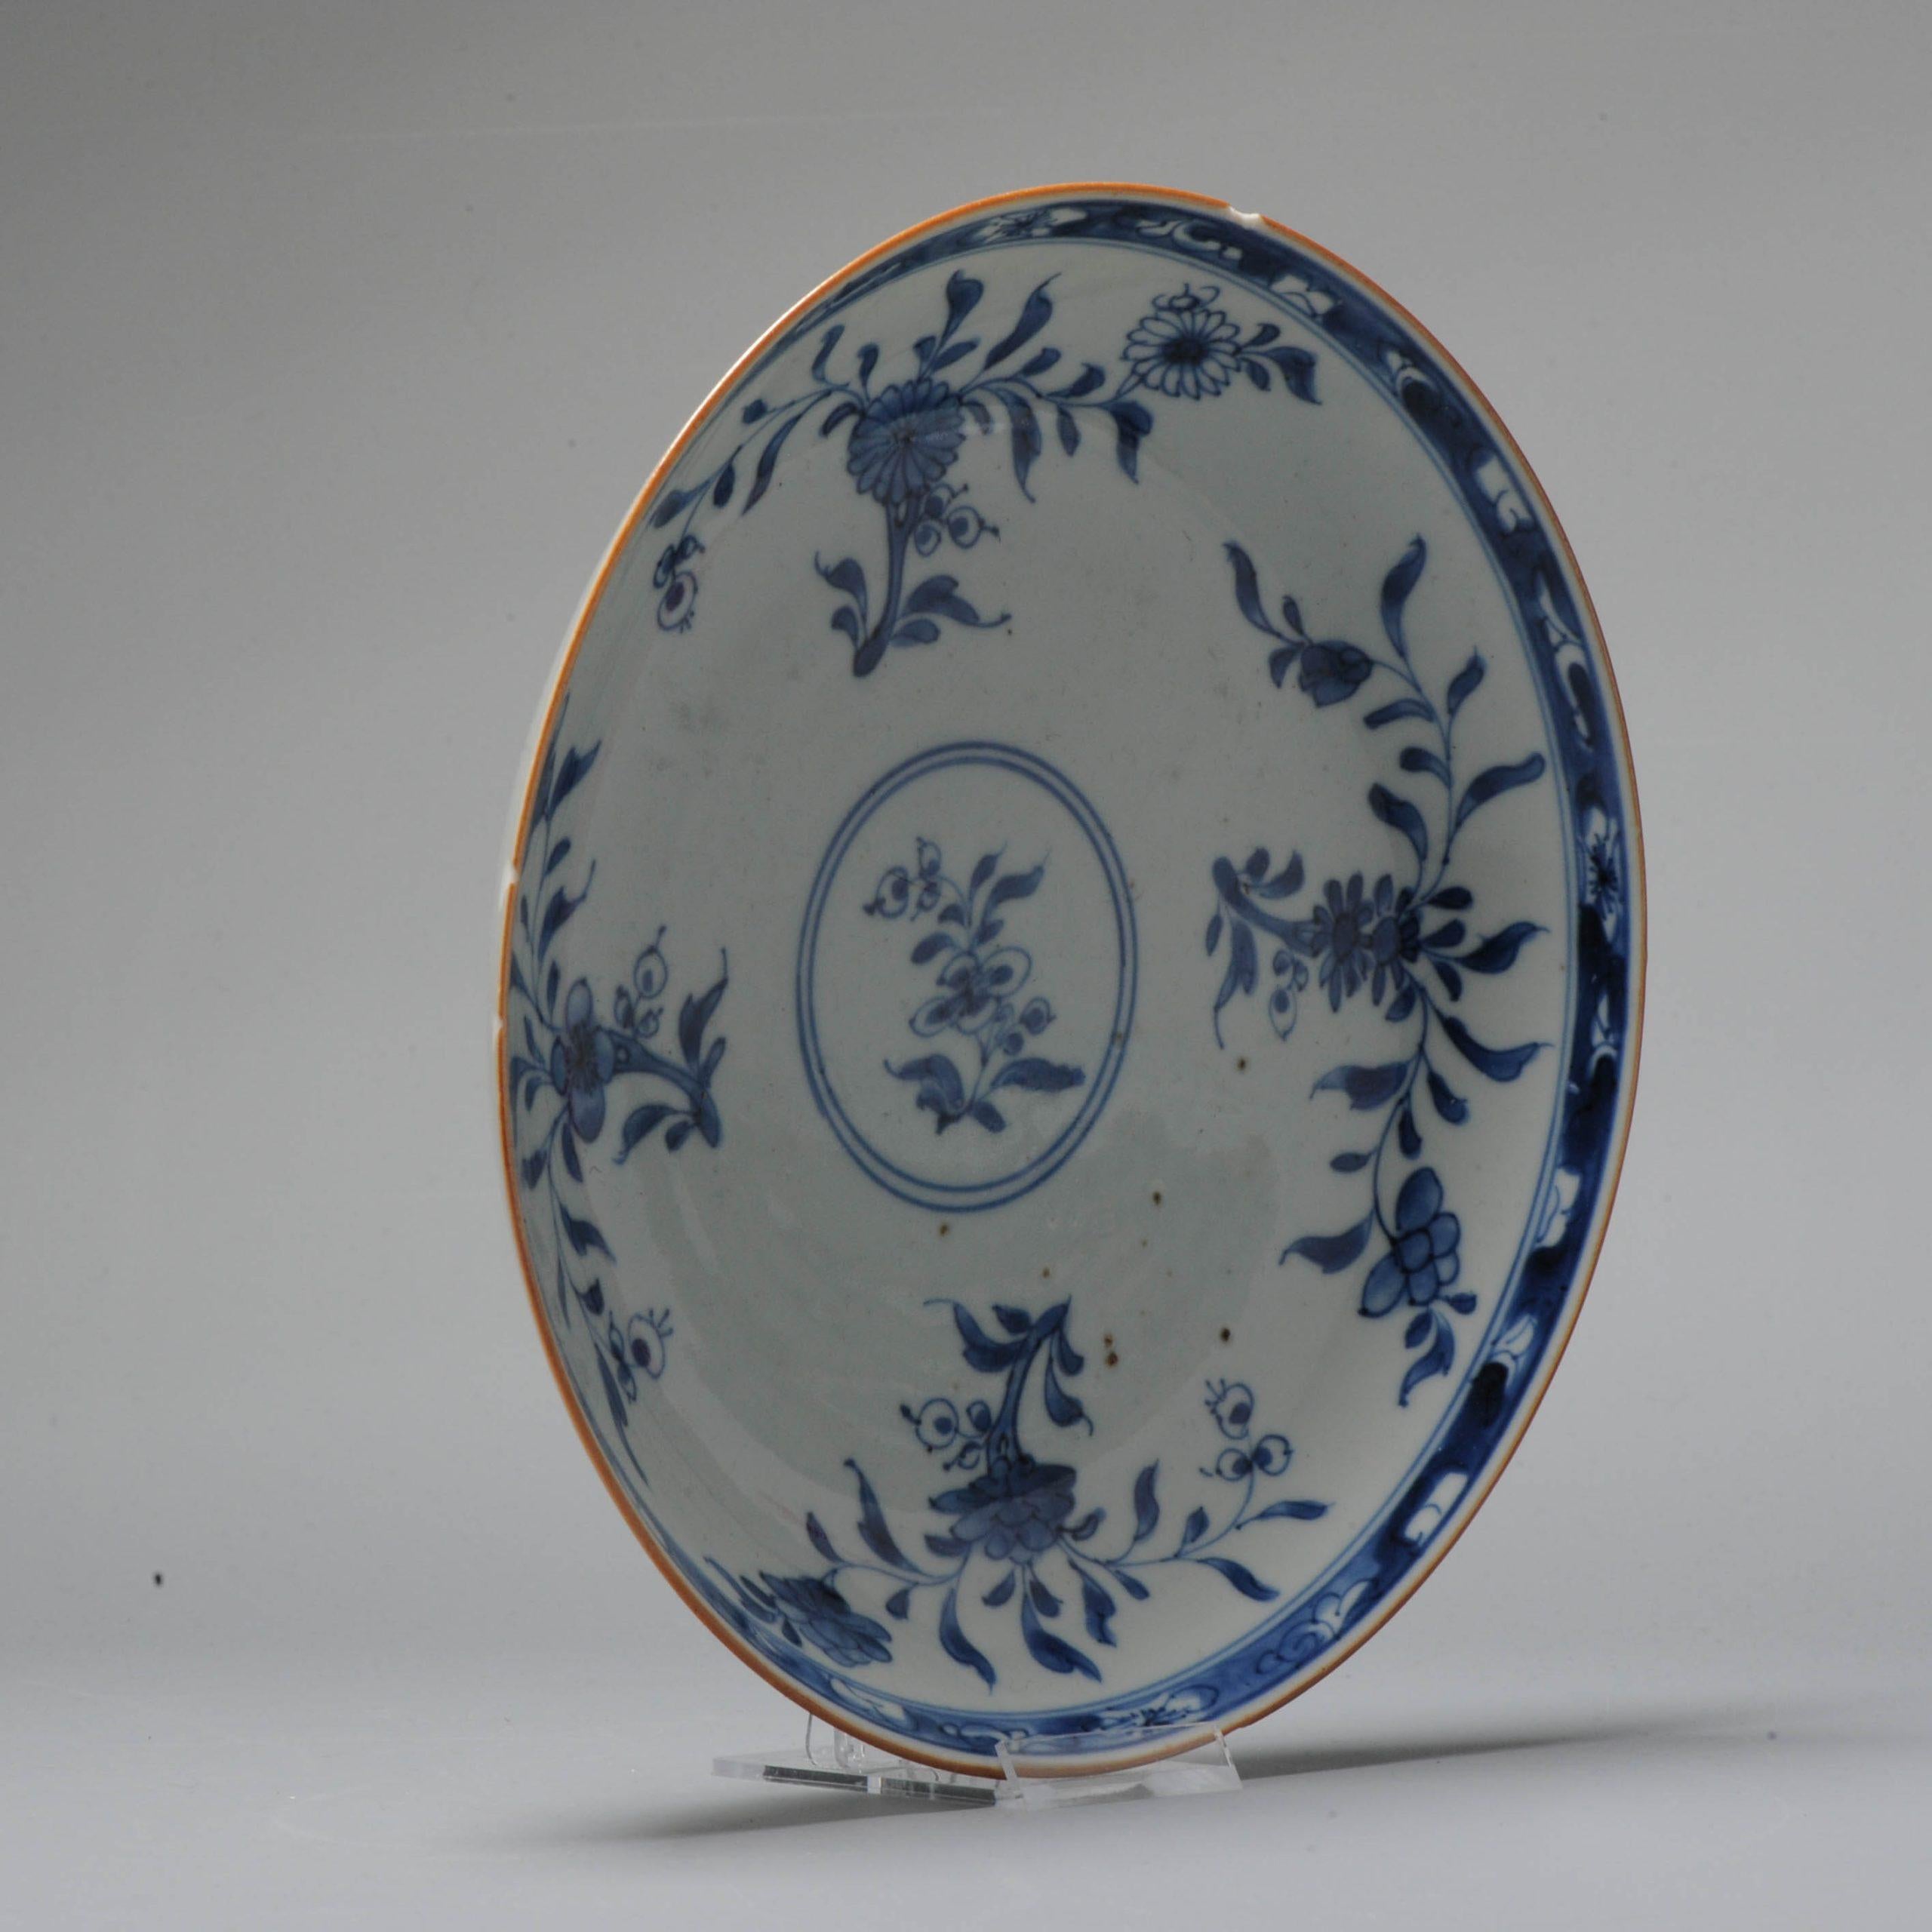 A very nicely richly decorated plate with floral design.

Additional information:
Material: Porcelain & Pottery
Type: Plates
Color: Blue & White
Region of Origin: China
Emperor: Qianlong (1735-1796), Yongzheng (1722-1735)
Period: 18th century Qing